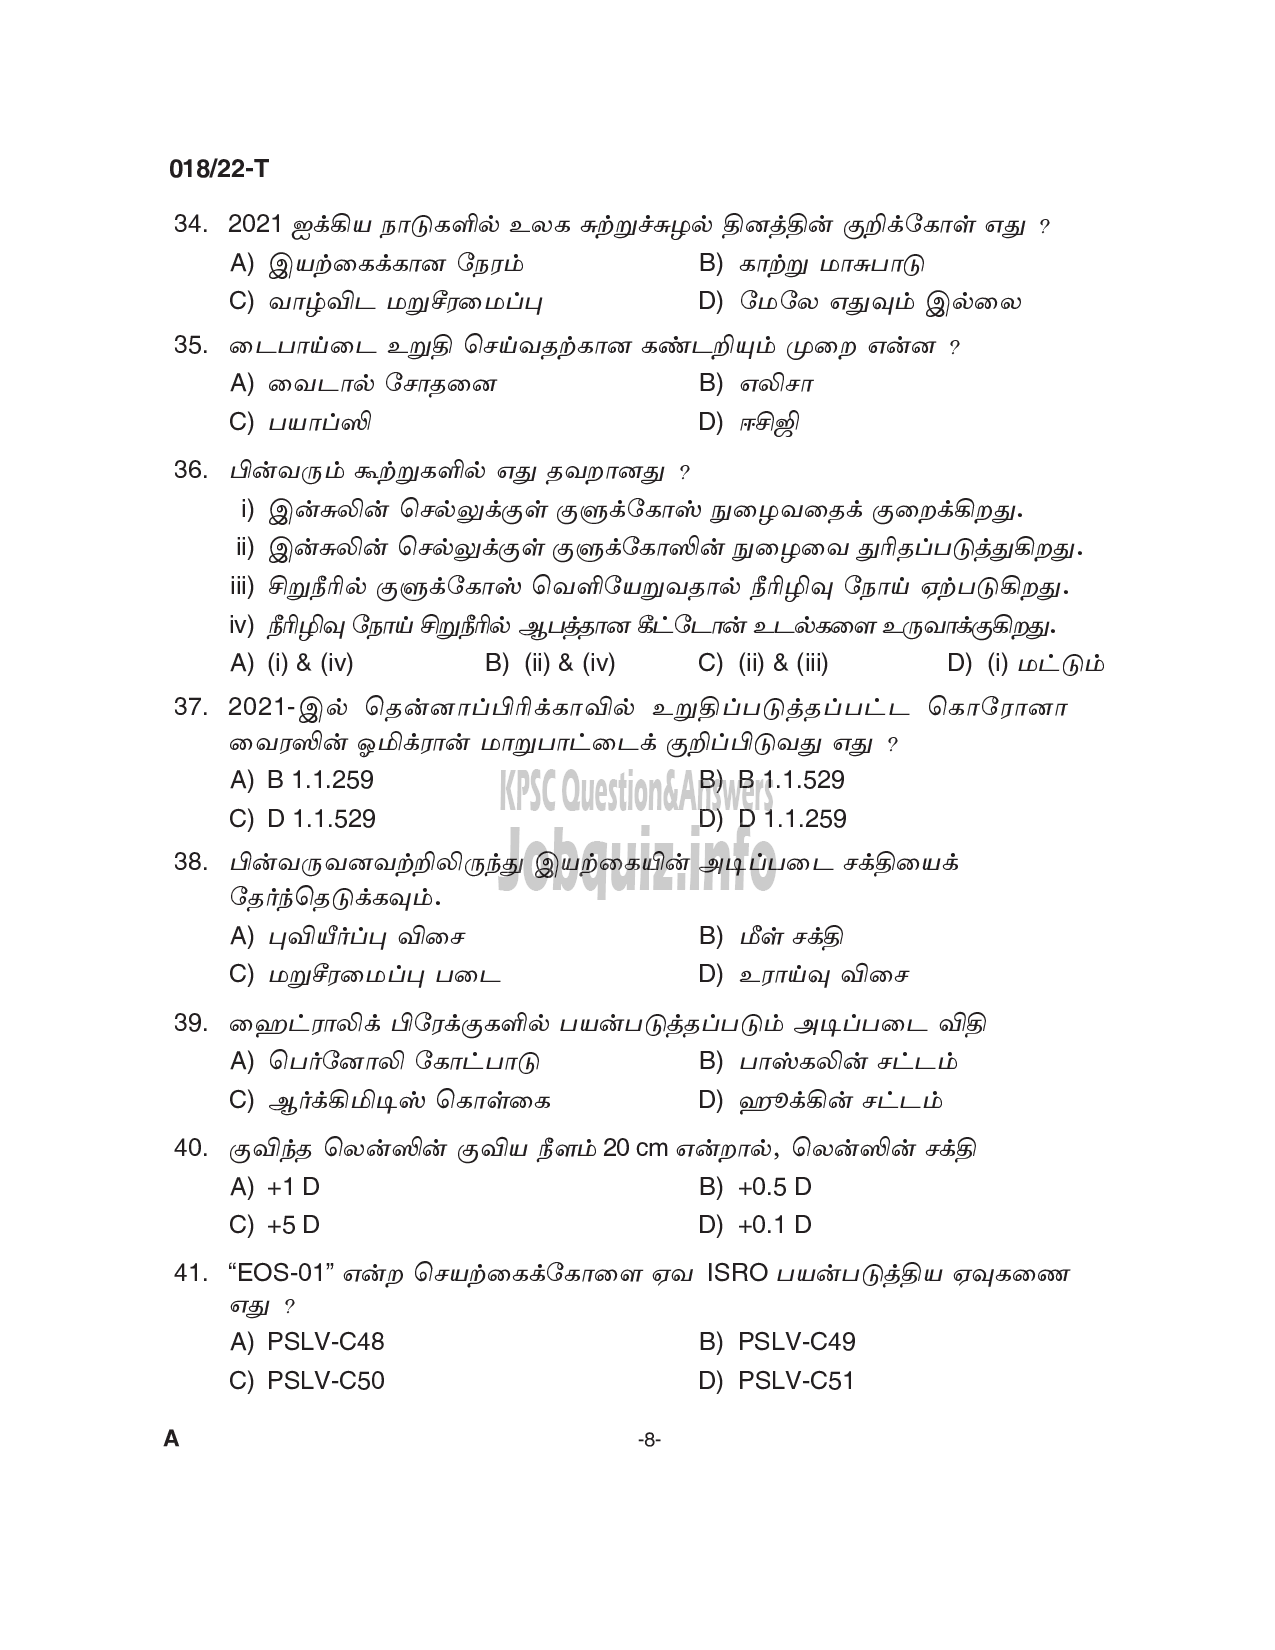 Kerala PSC Question Paper - Fireman (Trainee), Firewoman (Trainee) - Fire and Rescue Service --8